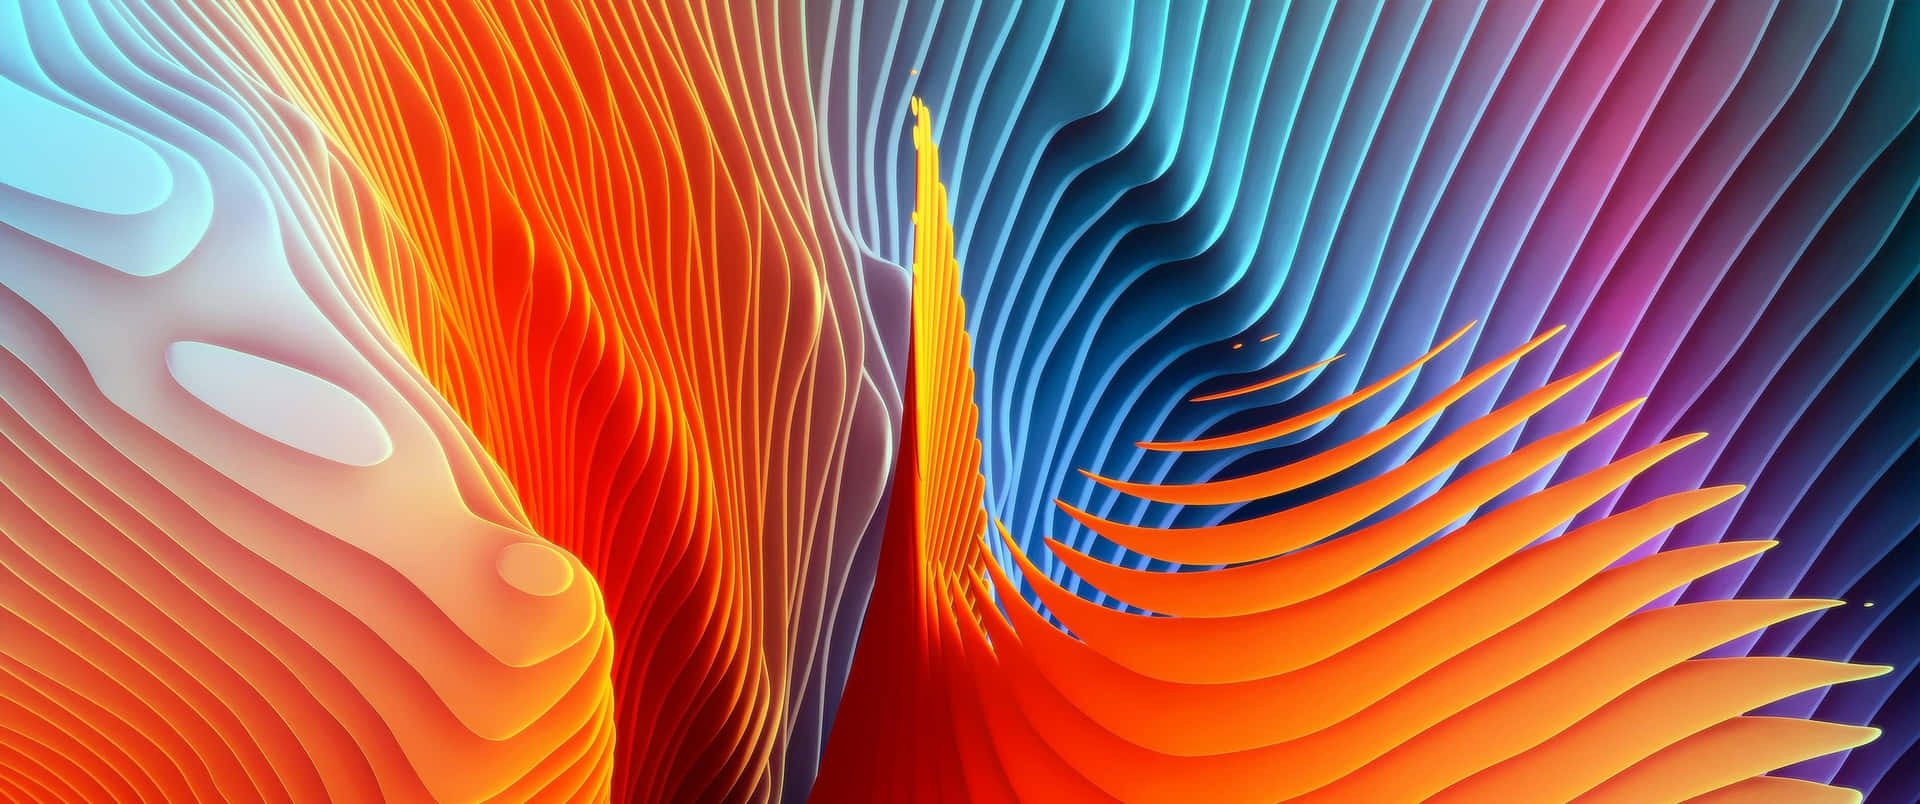 Abstract Wave Patterns Wallpaper